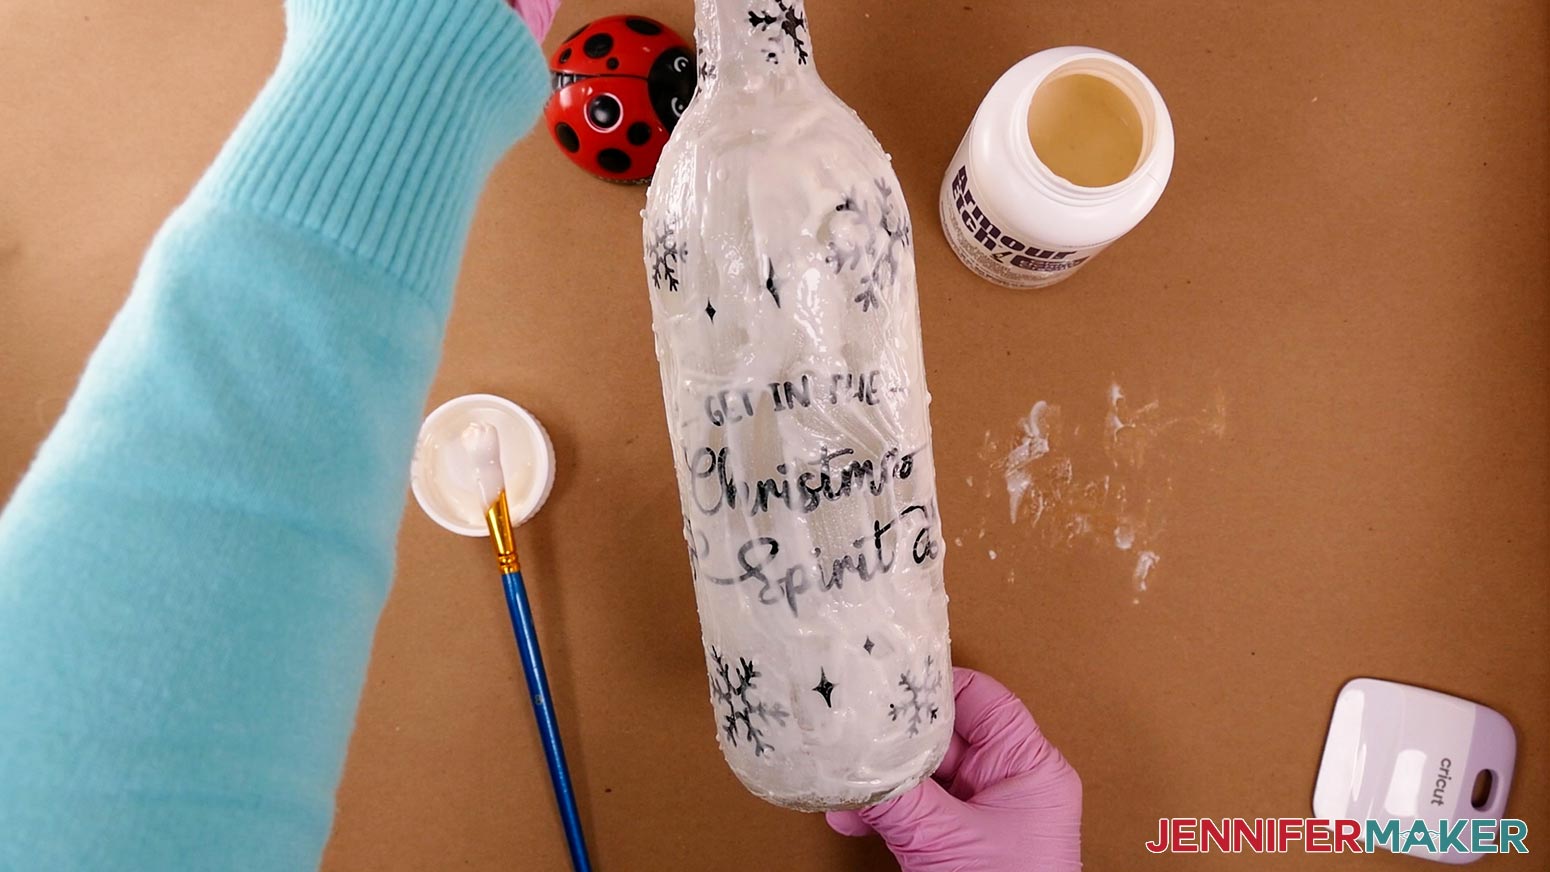 Cover your entire bottle with enough etching cream that the clear glass can no longer be seen